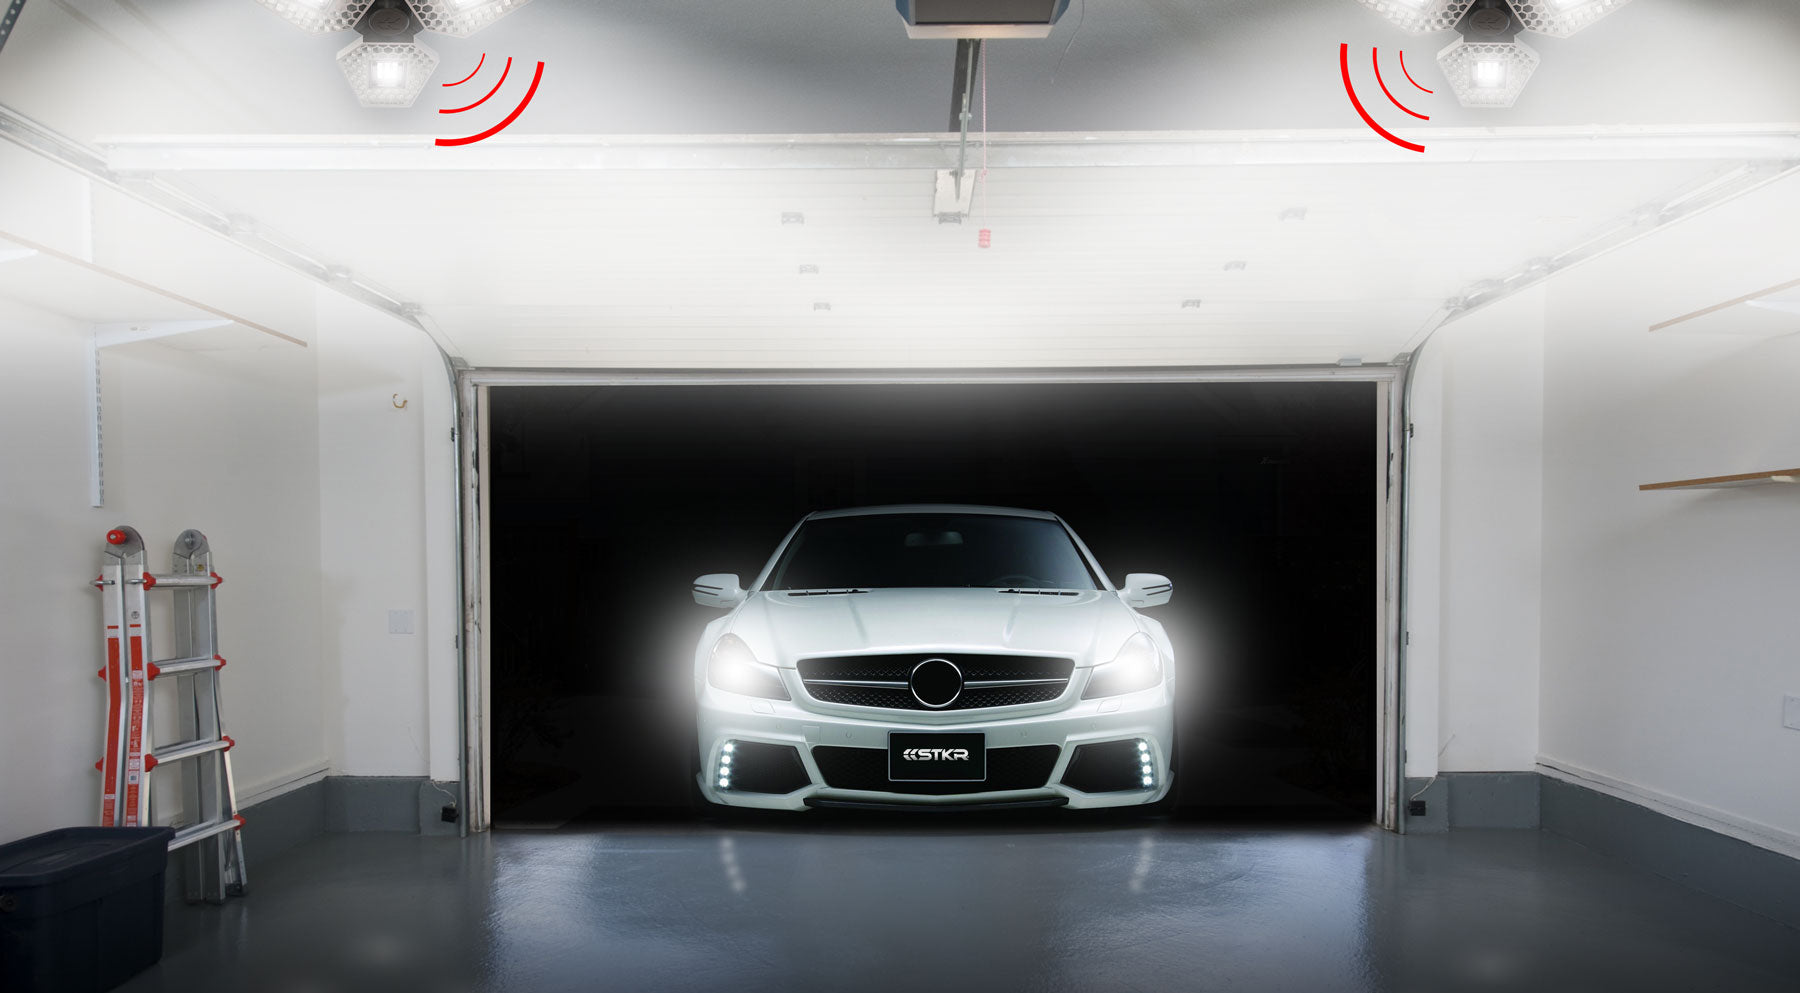 clean garage with two TRiLIGHTs. Red graphics depicting the lights 'sensing' the car that has just started to enter.